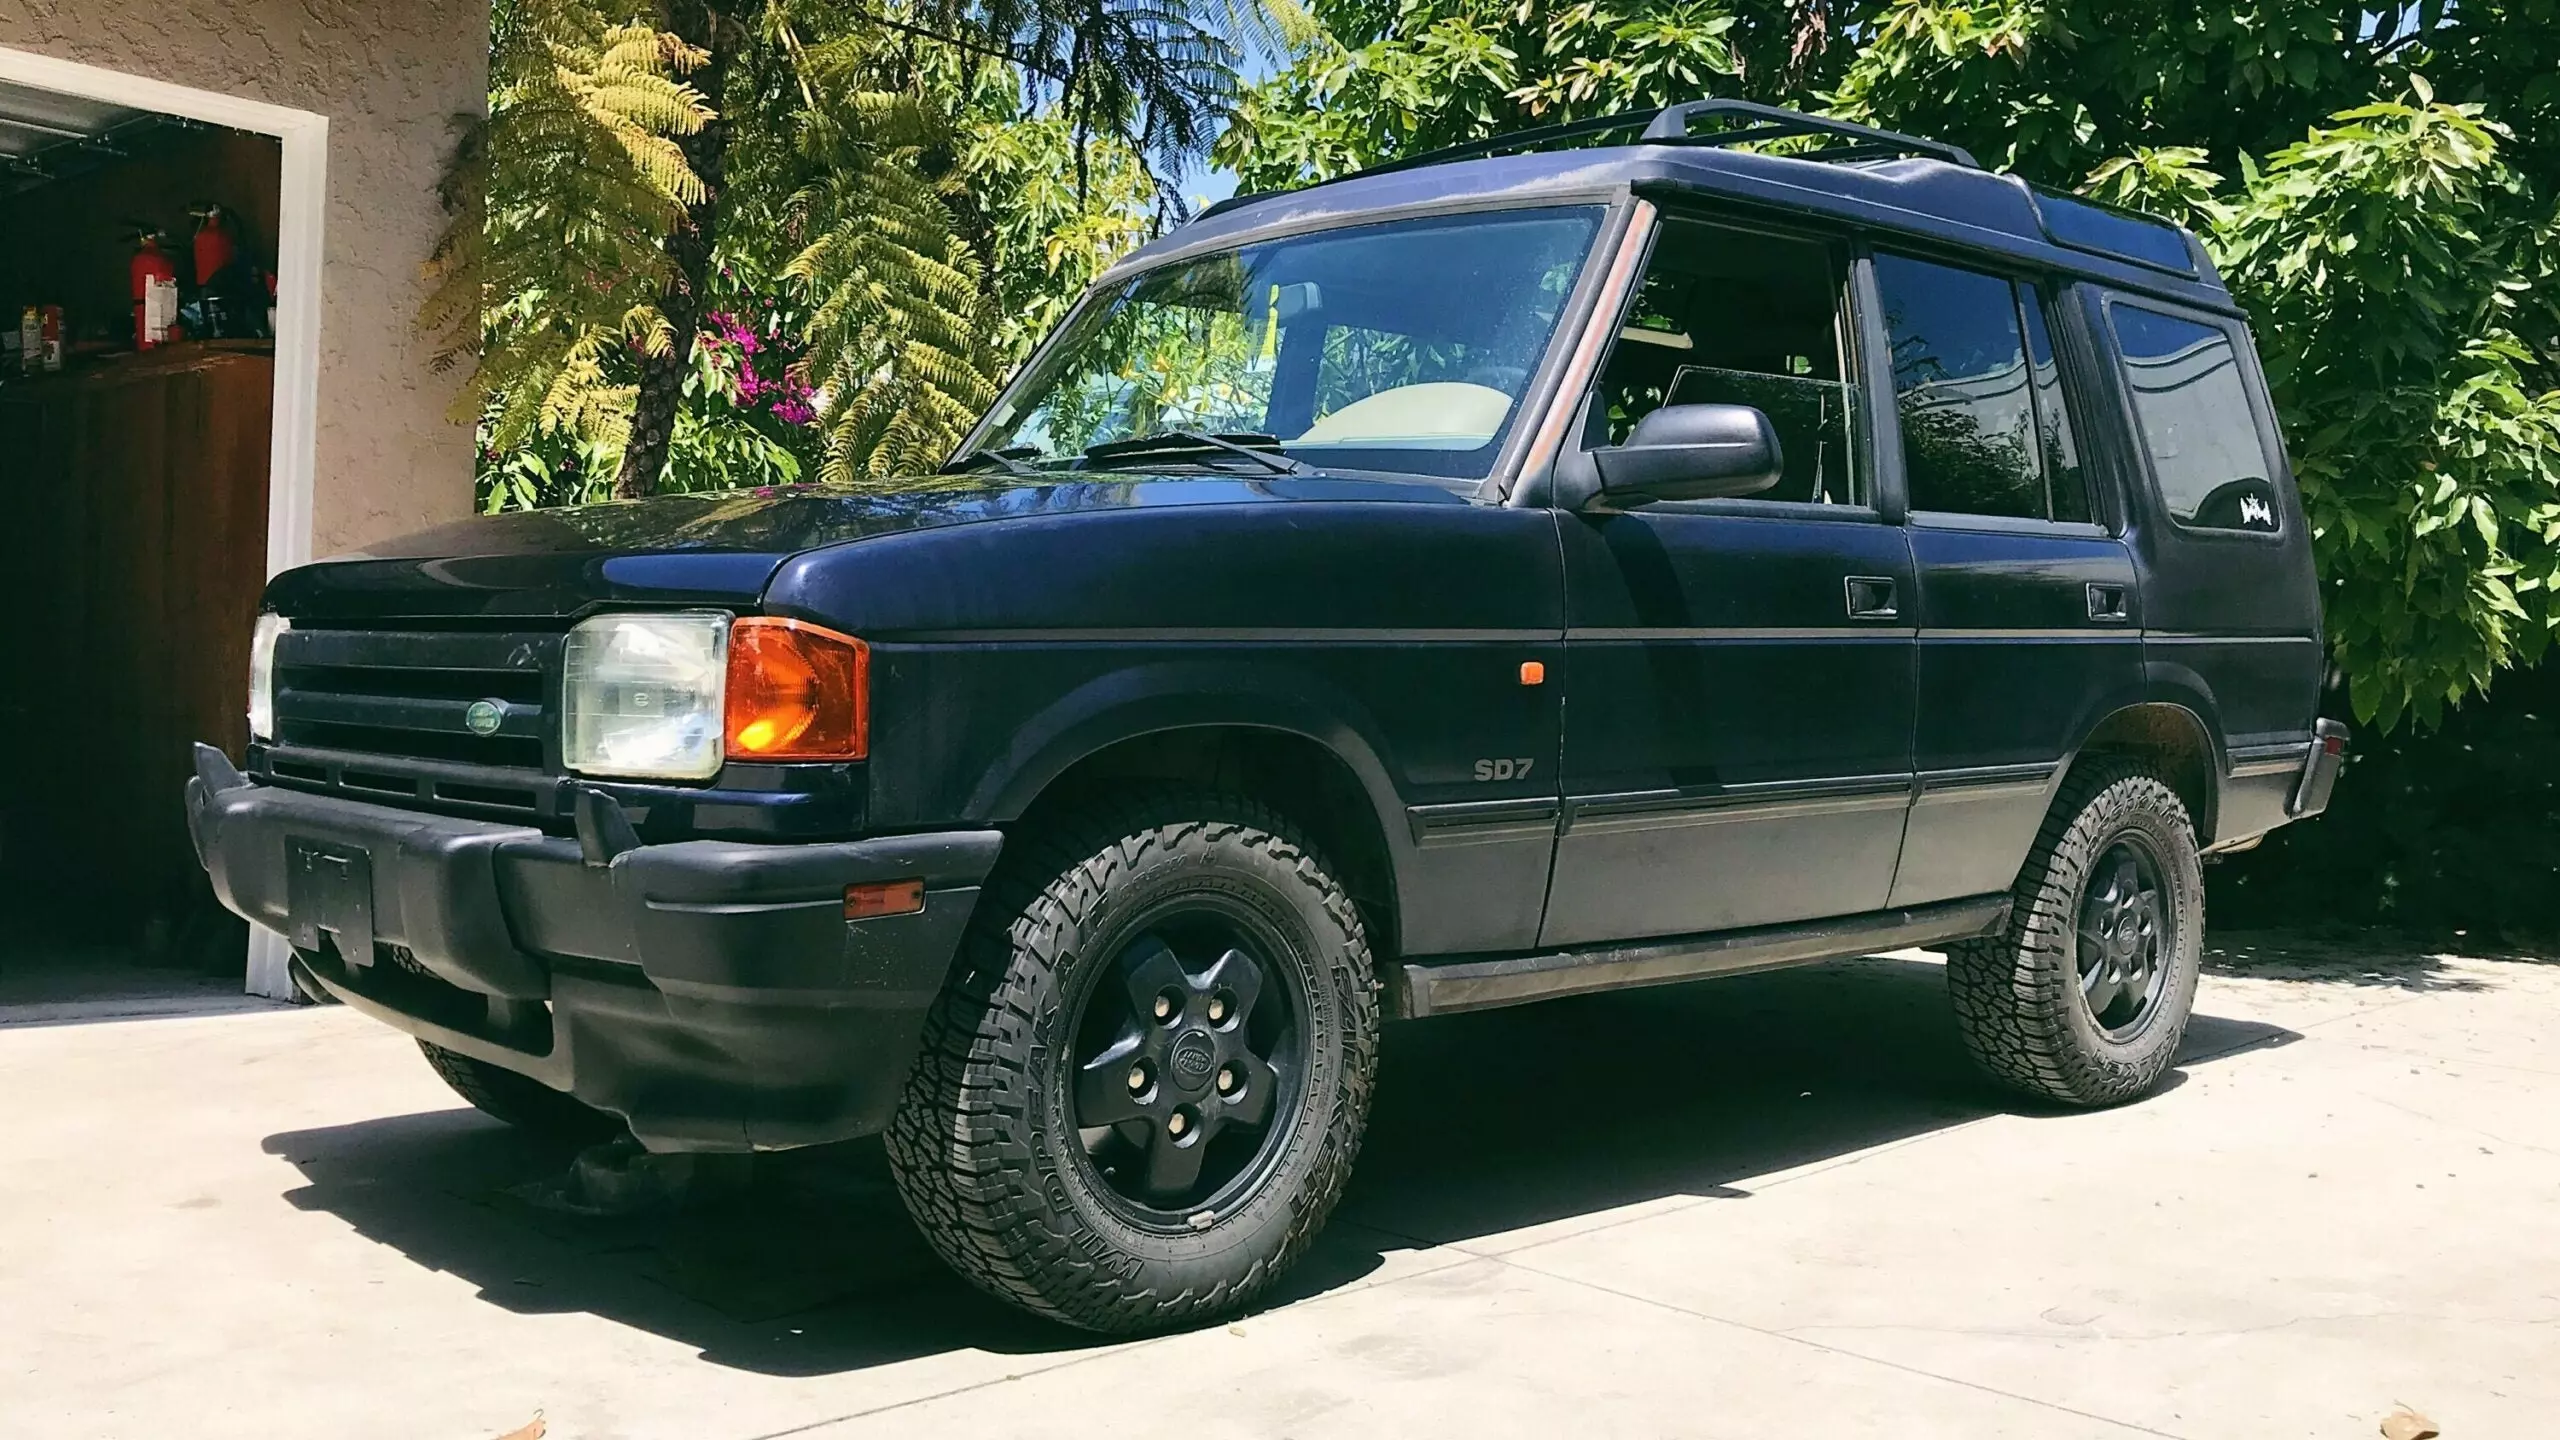 How I Made My Used Land Rover Discovery Look Presentable on a Dollar-Store Budget